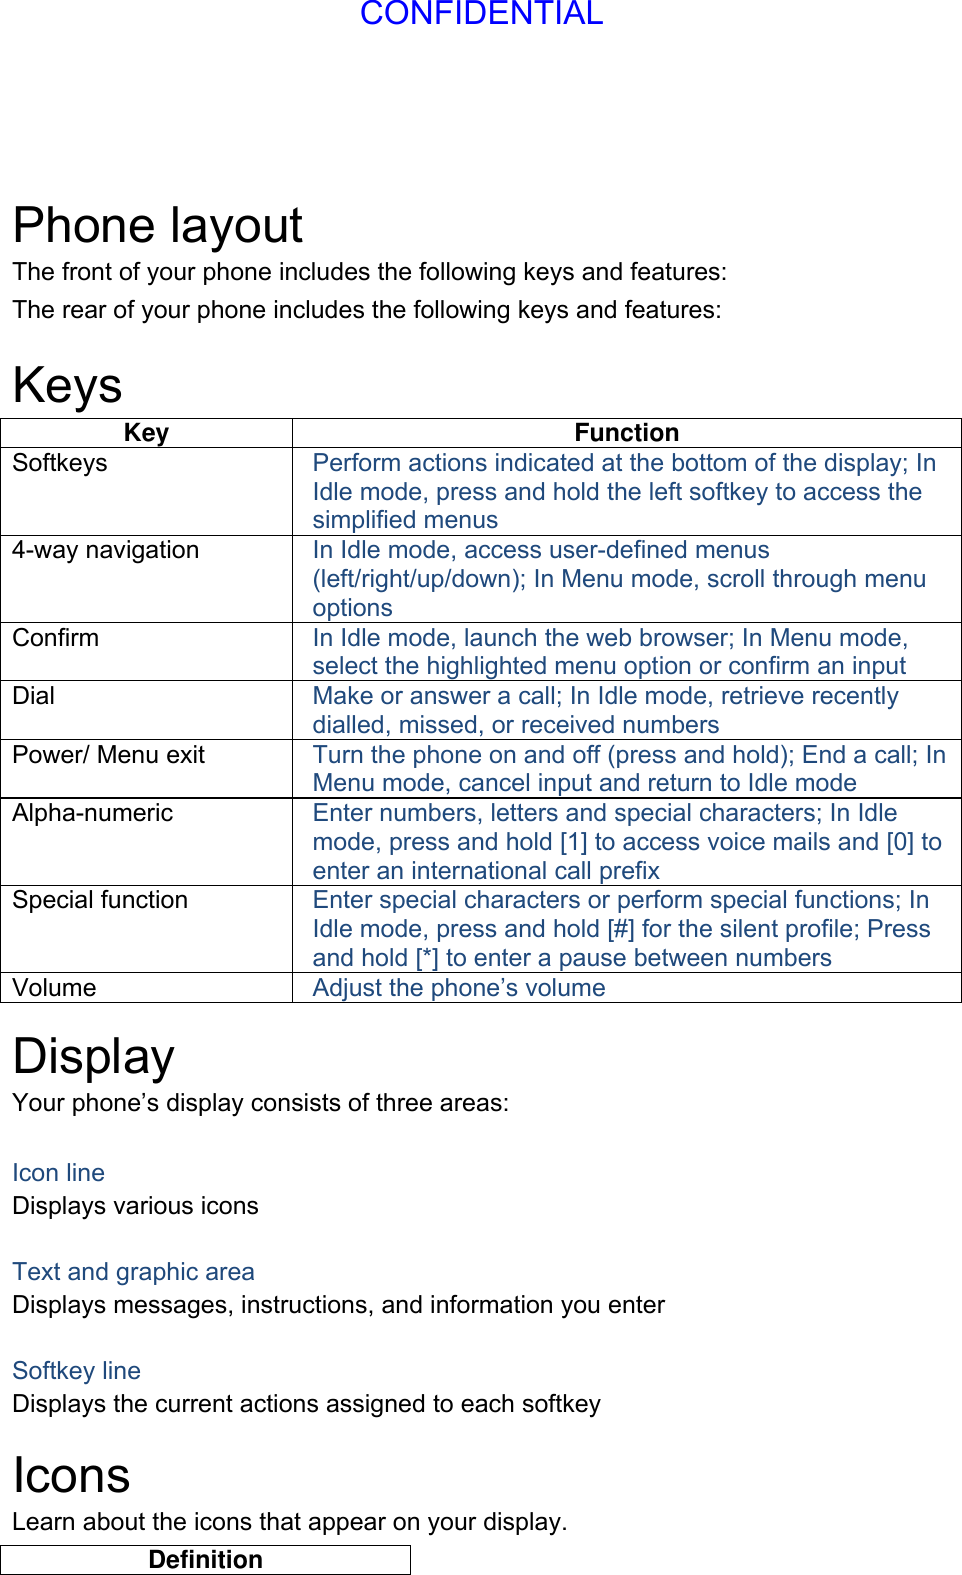  Phone layout The front of your phone includes the following keys and features: The rear of your phone includes the following keys and features:  Keys Key Function Softkeys  Perform actions indicated at the bottom of the display; In Idle mode, press and hold the left softkey to access the simplified menus 4-way navigation  In Idle mode, access user-defined menus (left/right/up/down); In Menu mode, scroll through menu options Confirm  In Idle mode, launch the web browser; In Menu mode, select the highlighted menu option or confirm an input Dial  Make or answer a call; In Idle mode, retrieve recently dialled, missed, or received numbers Power/ Menu exit  Turn the phone on and off (press and hold); End a call; In Menu mode, cancel input and return to Idle mode Alpha-numeric  Enter numbers, letters and special characters; In Idle mode, press and hold [1] to access voice mails and [0] to enter an international call prefix Special function  Enter special characters or perform special functions; In Idle mode, press and hold [#] for the silent profile; Press and hold [*] to enter a pause between numbers Volume  Adjust the phone’s volume  Display Your phone’s display consists of three areas:  Icon line Displays various icons  Text and graphic area Displays messages, instructions, and information you enter  Softkey line Displays the current actions assigned to each softkey  Icons Learn about the icons that appear on your display. Definition CONFIDENTIAL